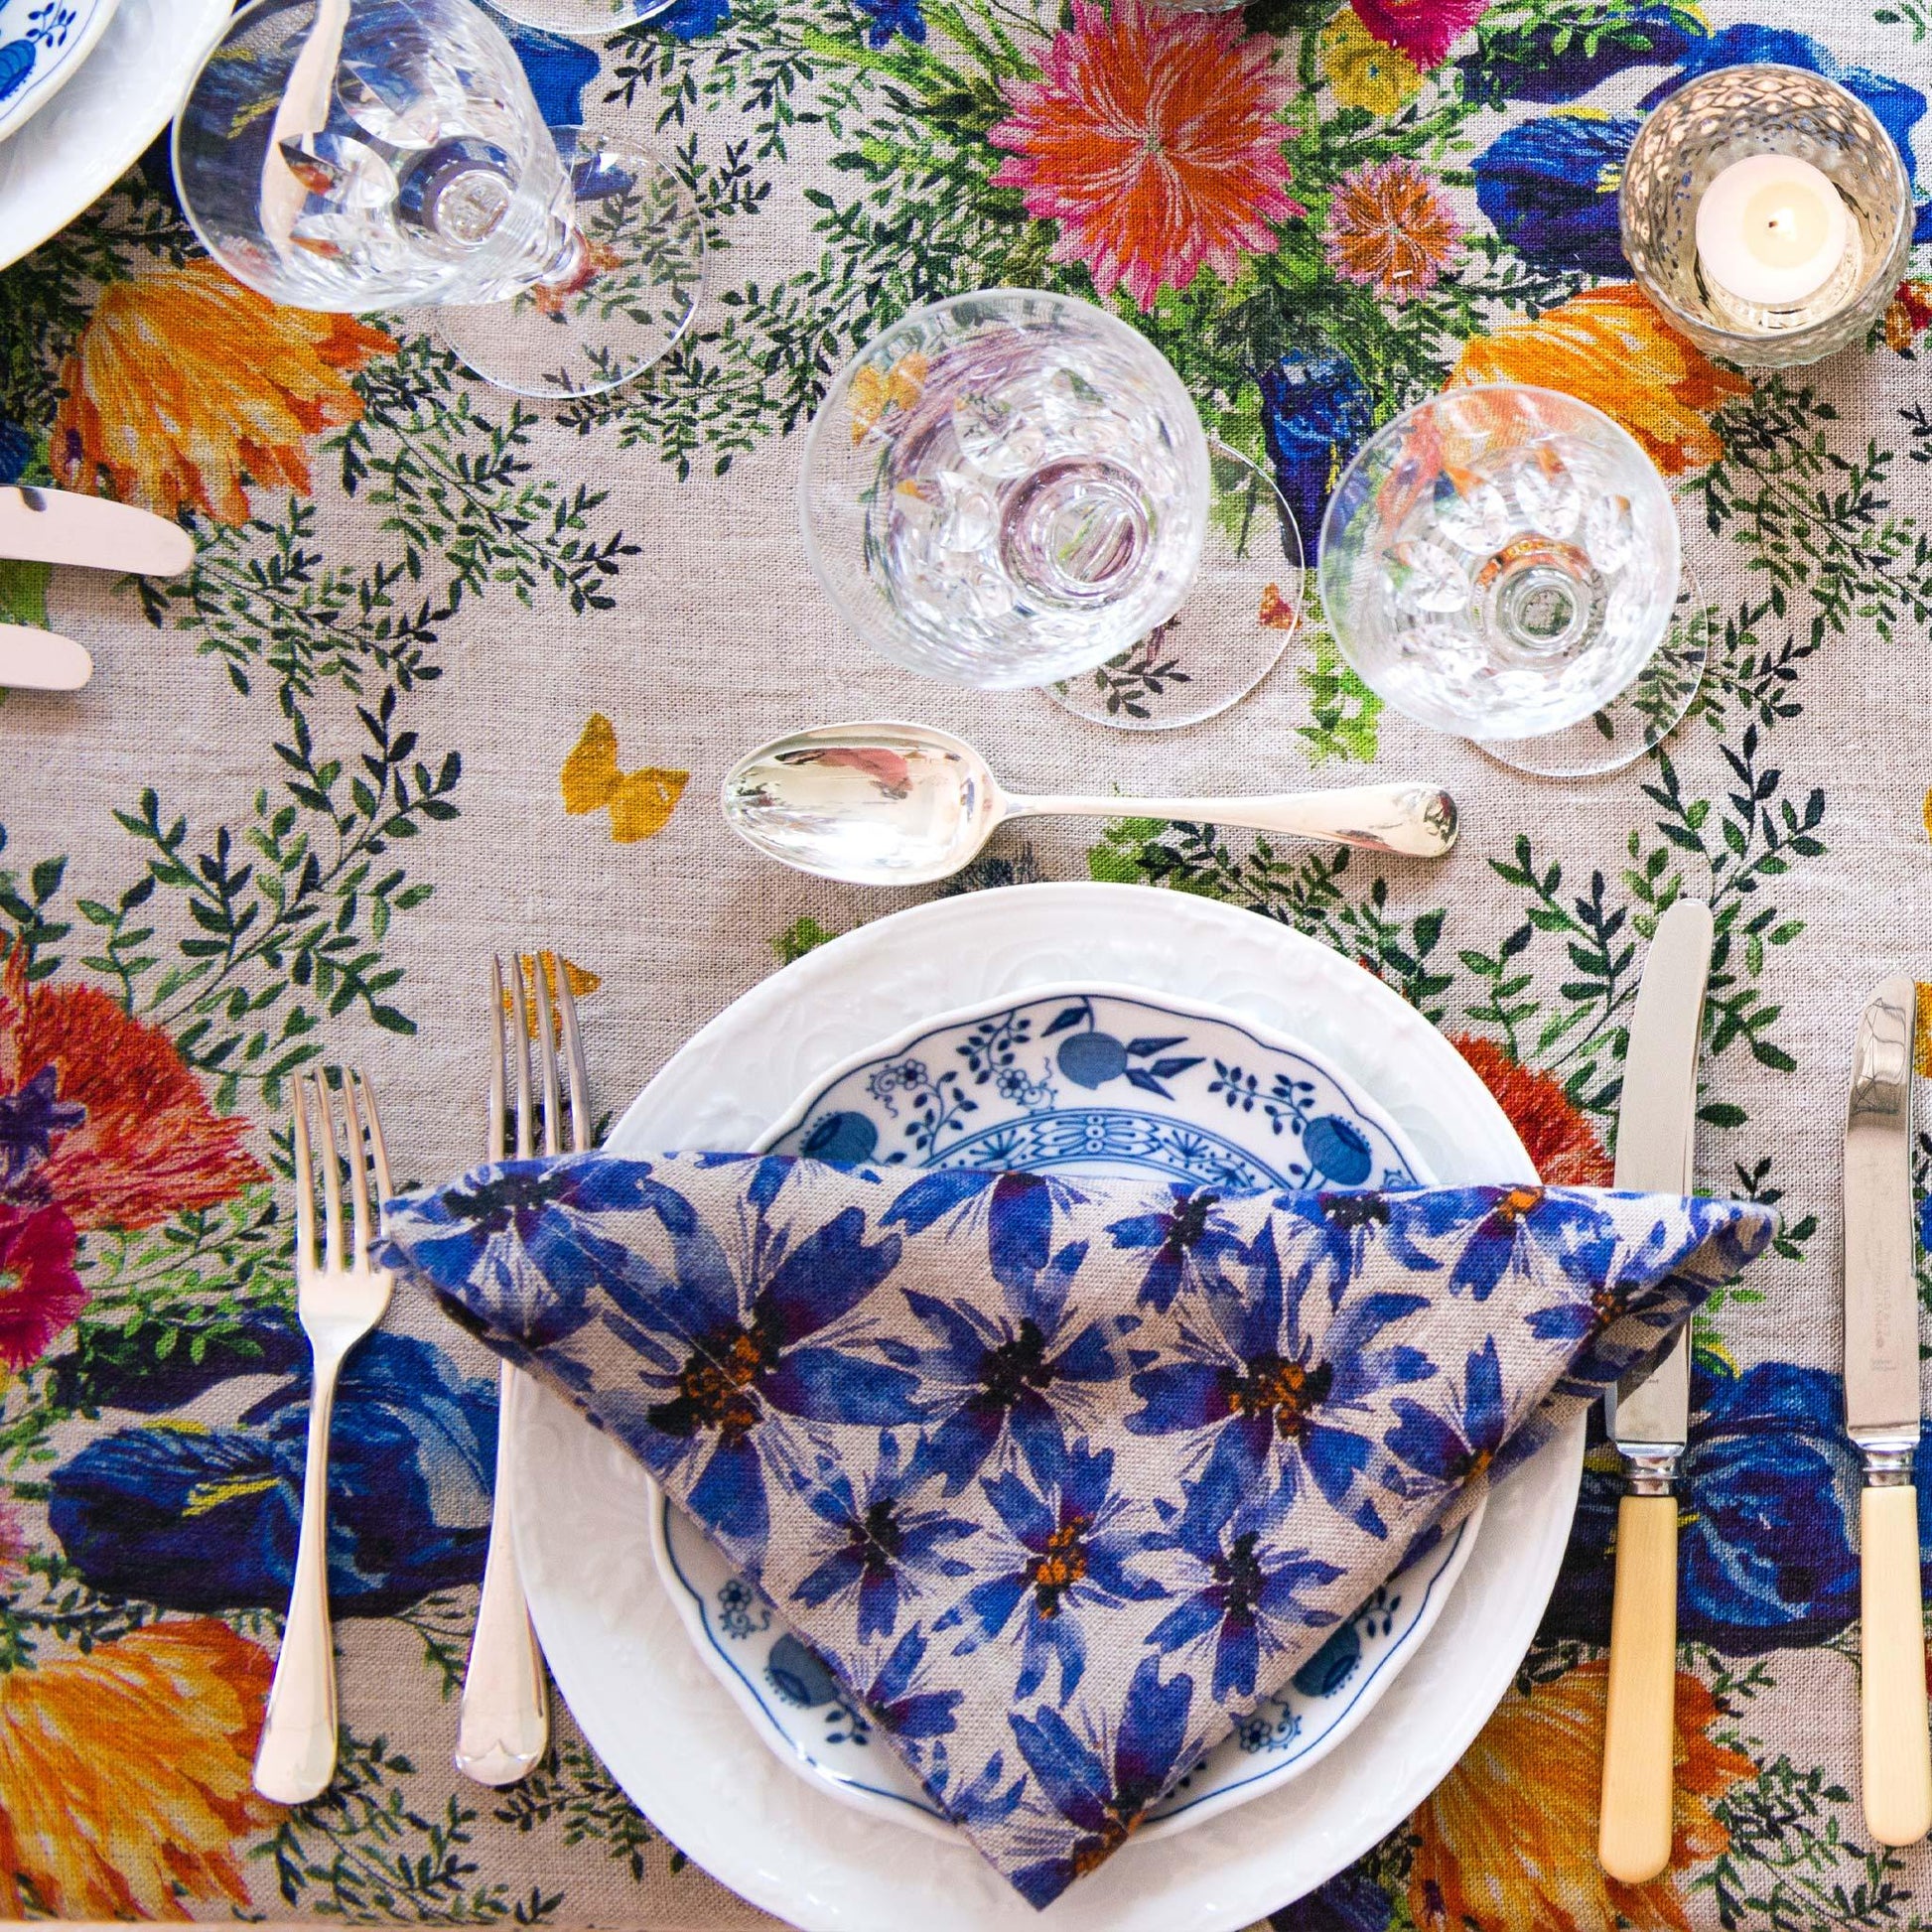 Colorful table setting with blue and white linen napkin.